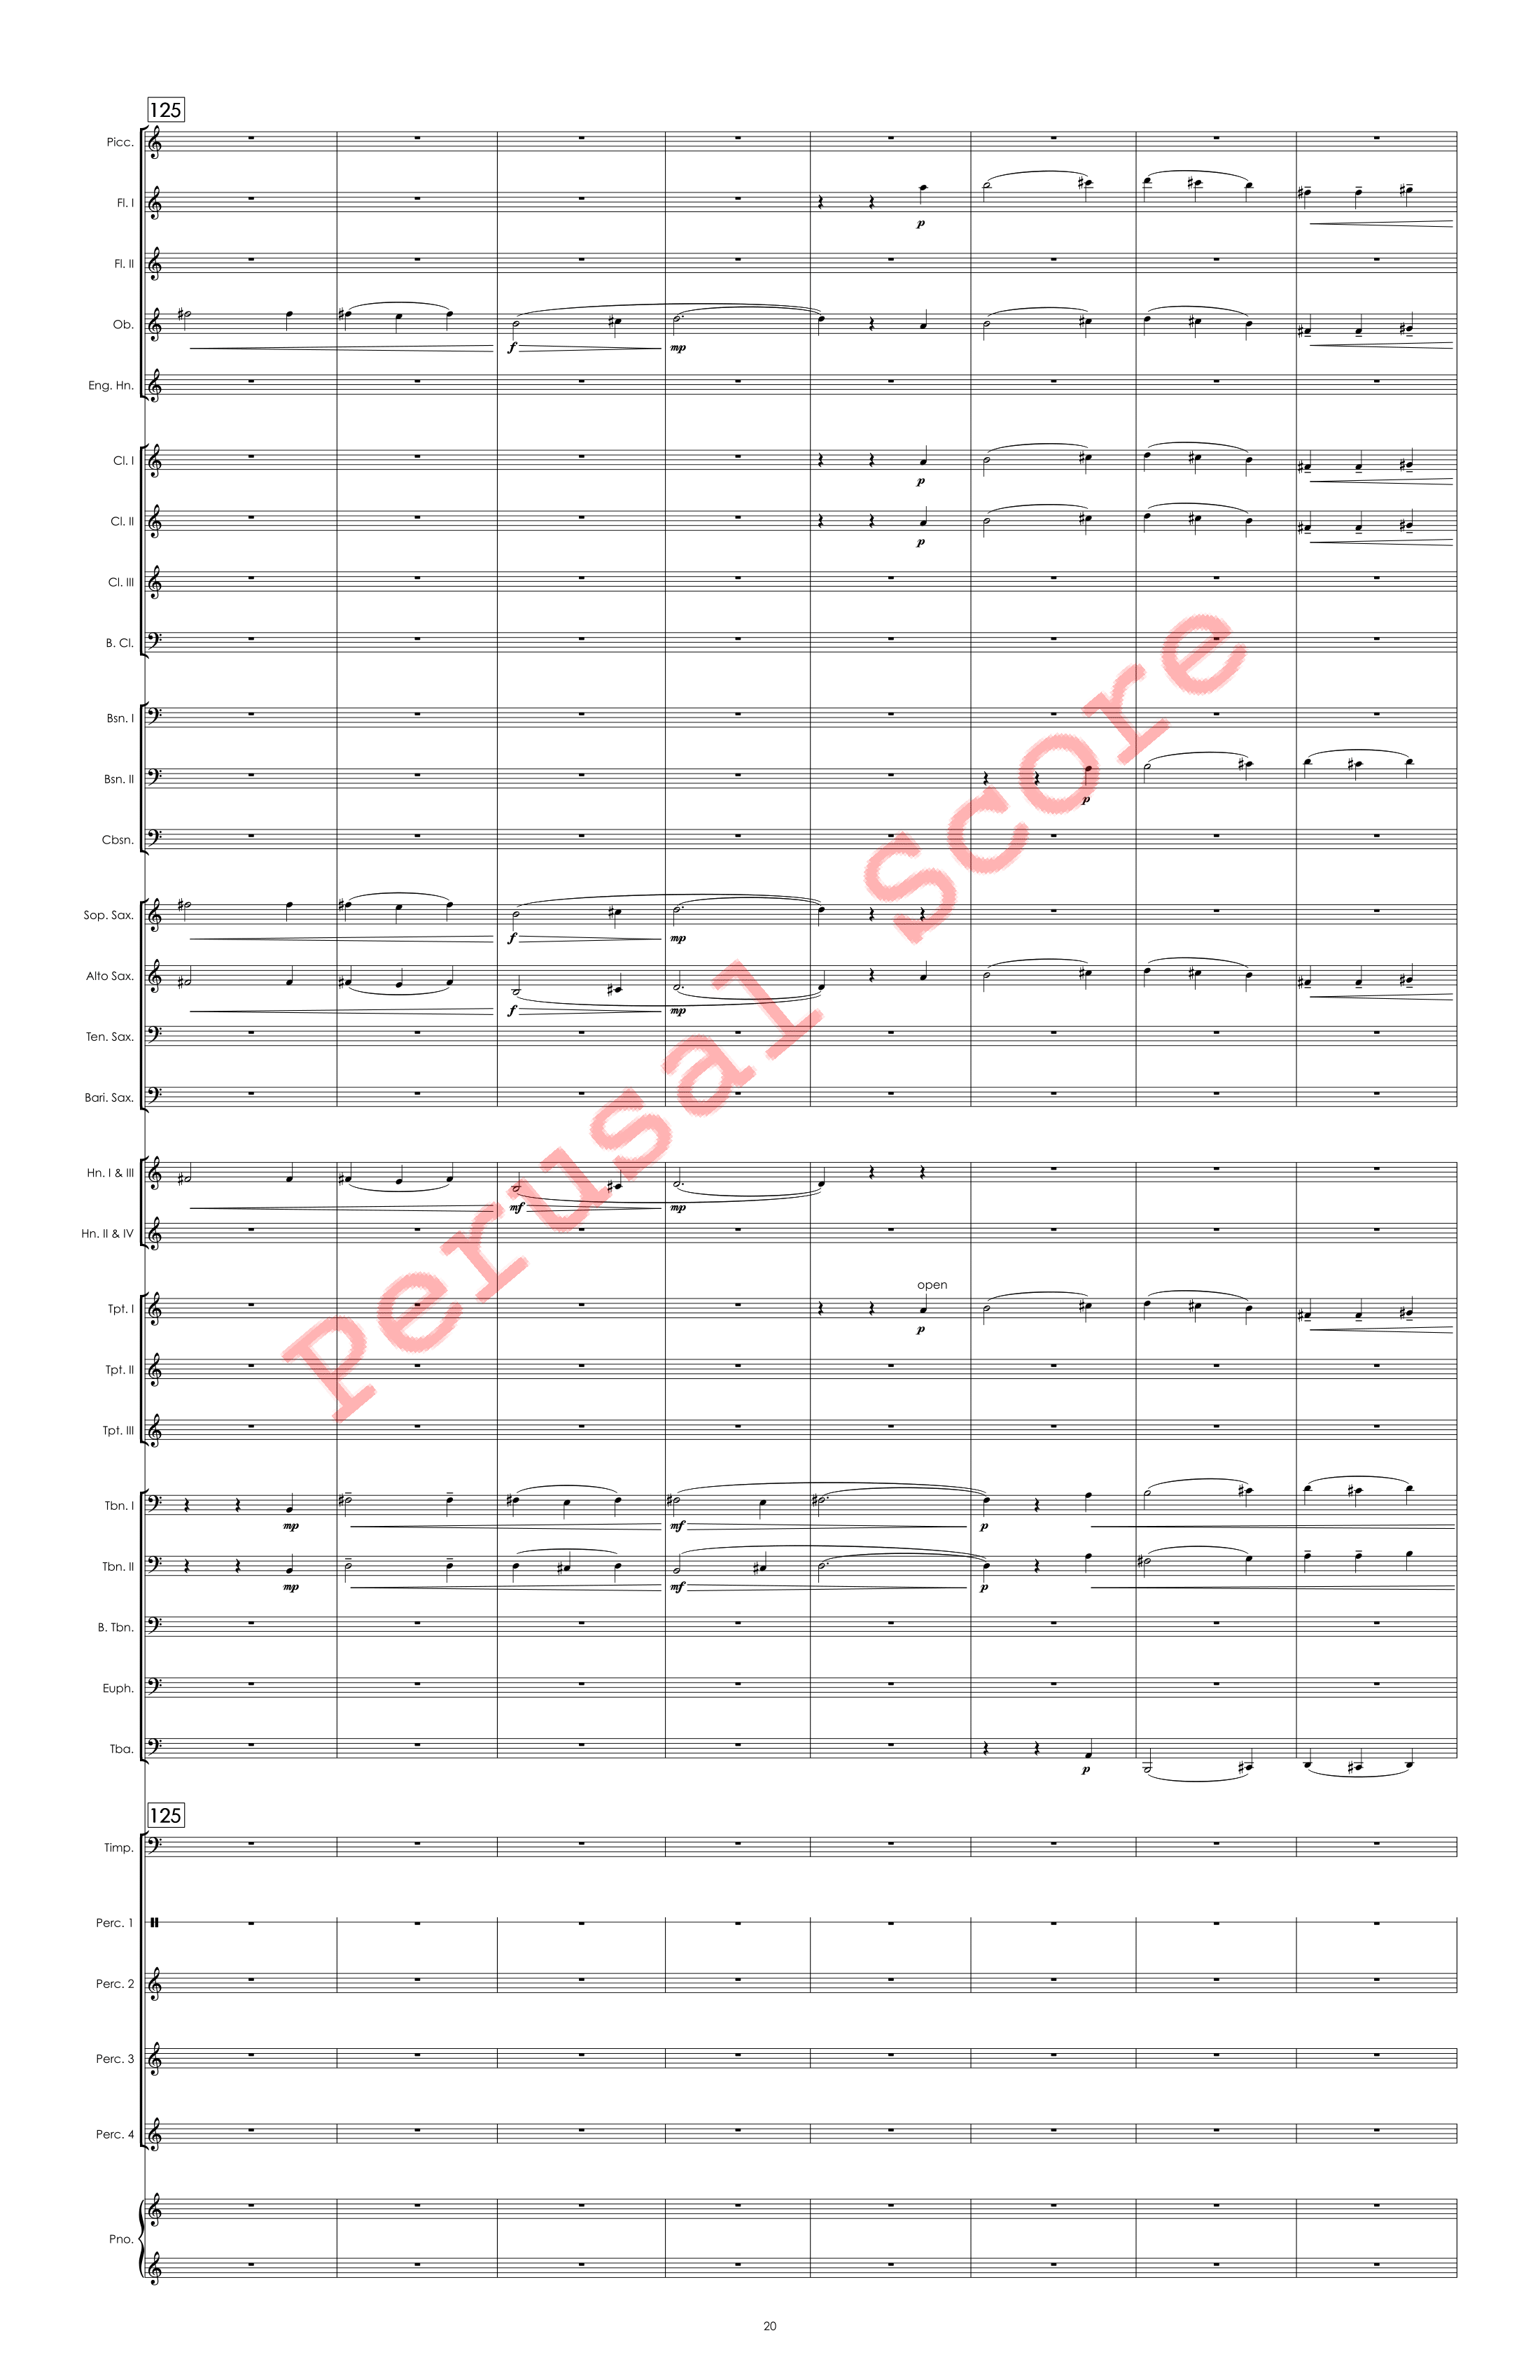 Canadian Folk Song - FINISHED 4.18.23- Full Score perusal score-20.png